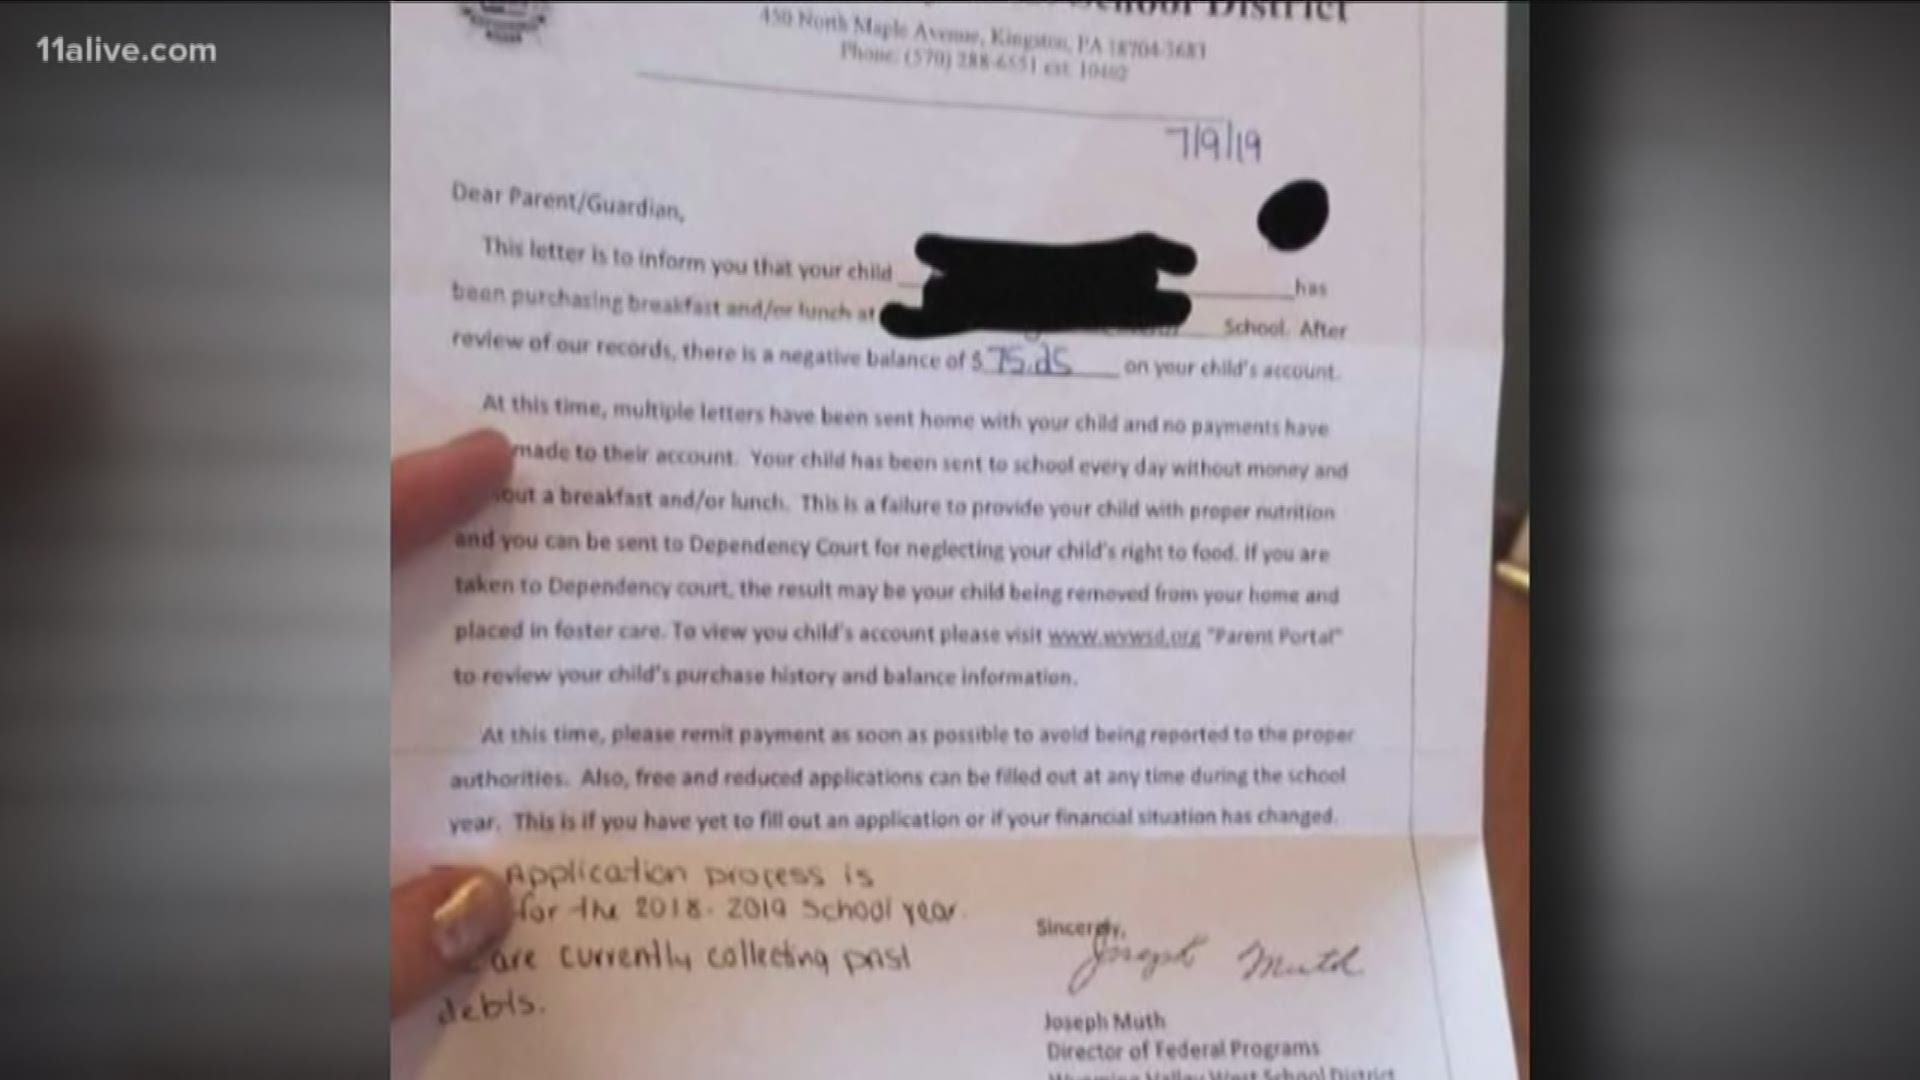 2019school Sex Hd Videos - People react to letter threatening parents if they don't settle lunch debts  | 11alive.com